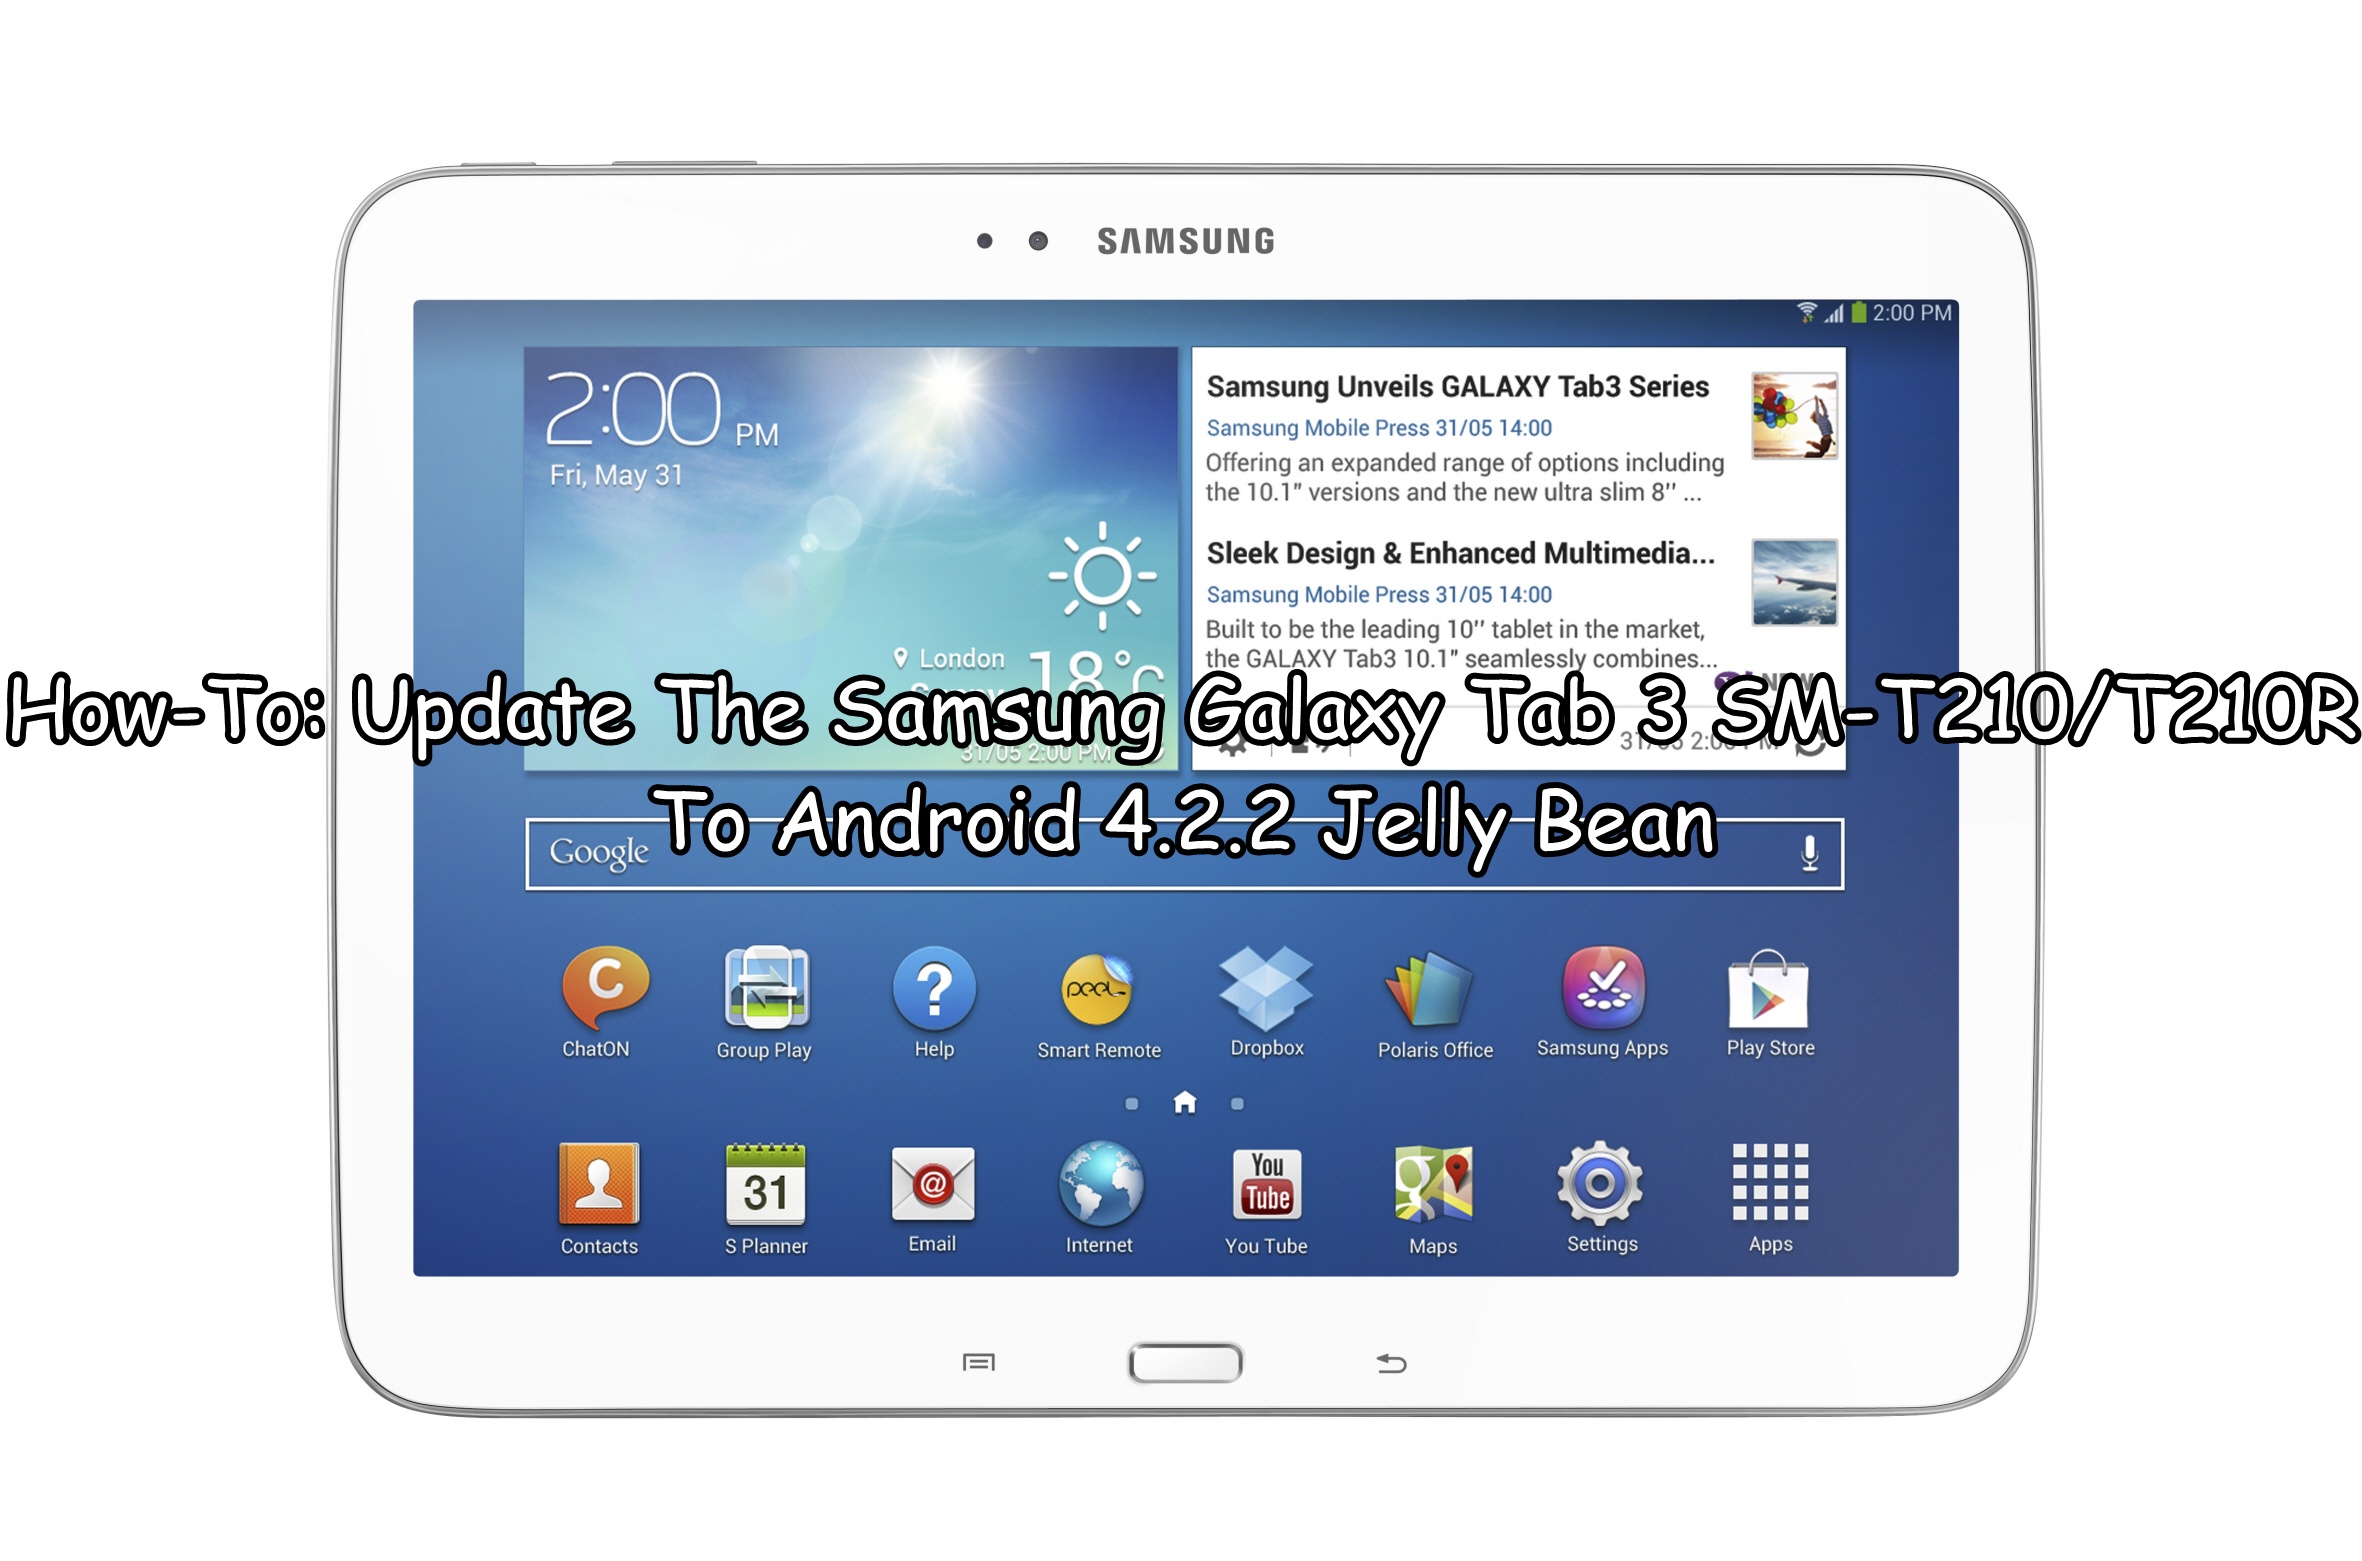 HowTo Update The Samsung Galaxy Tab 3 SMT210/T210R To Android 4.2.2